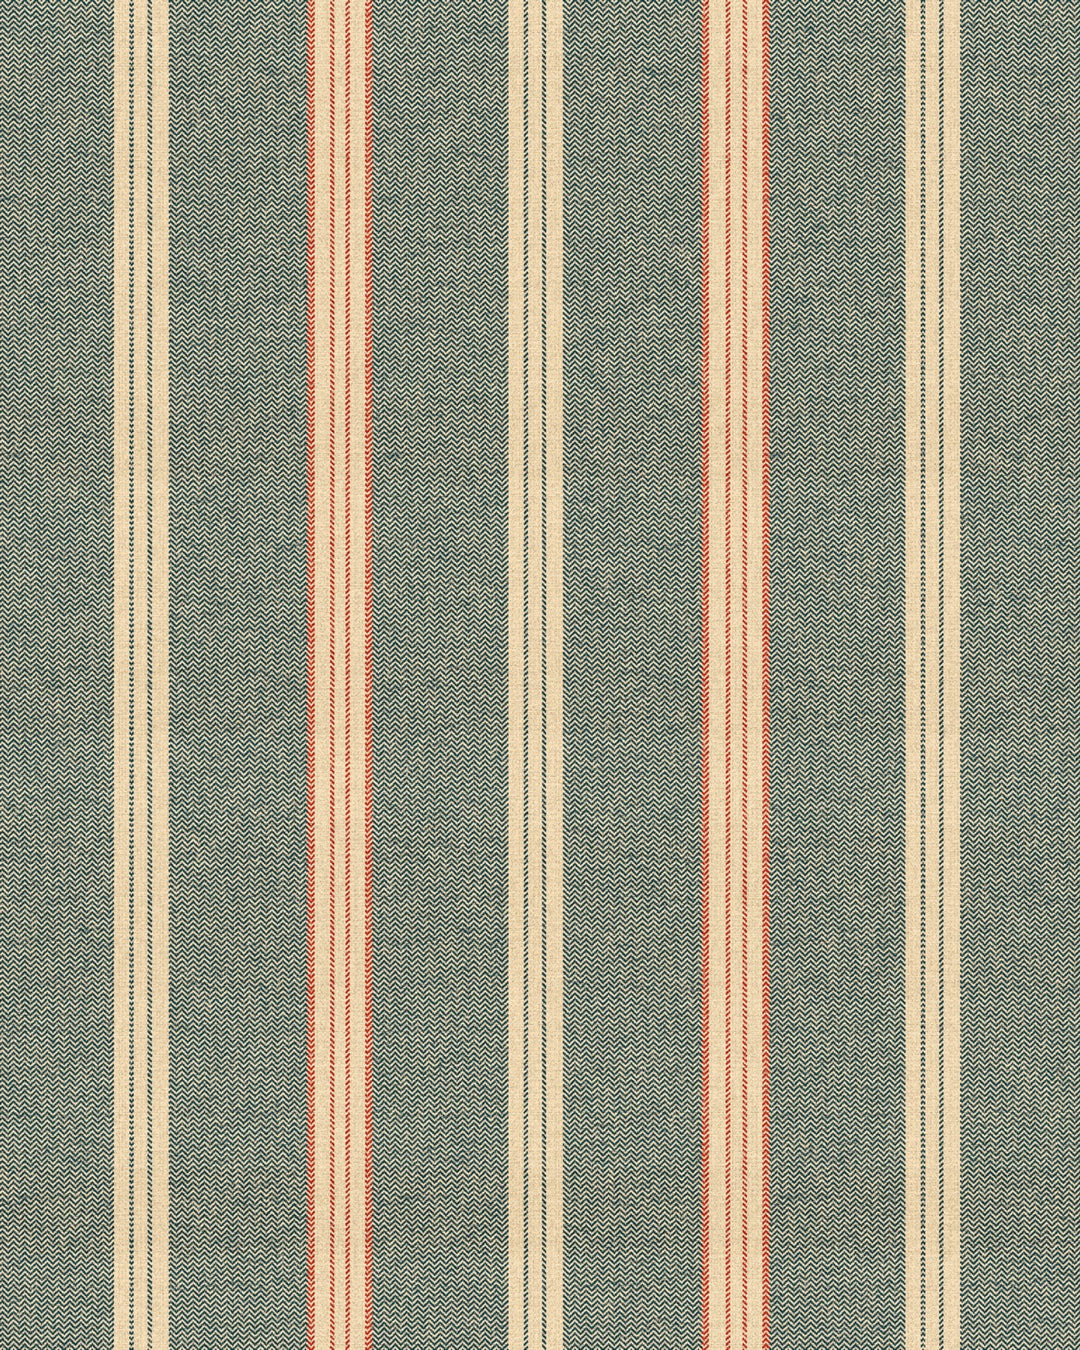 Mind The Gap Oregon Washed Blue Woodstock Collection Luxury Wallpaper wall coveringmind-the-gap-woodstock-collection-green-blue-stripe-wallpaper-printed-texture-blue-denim-red